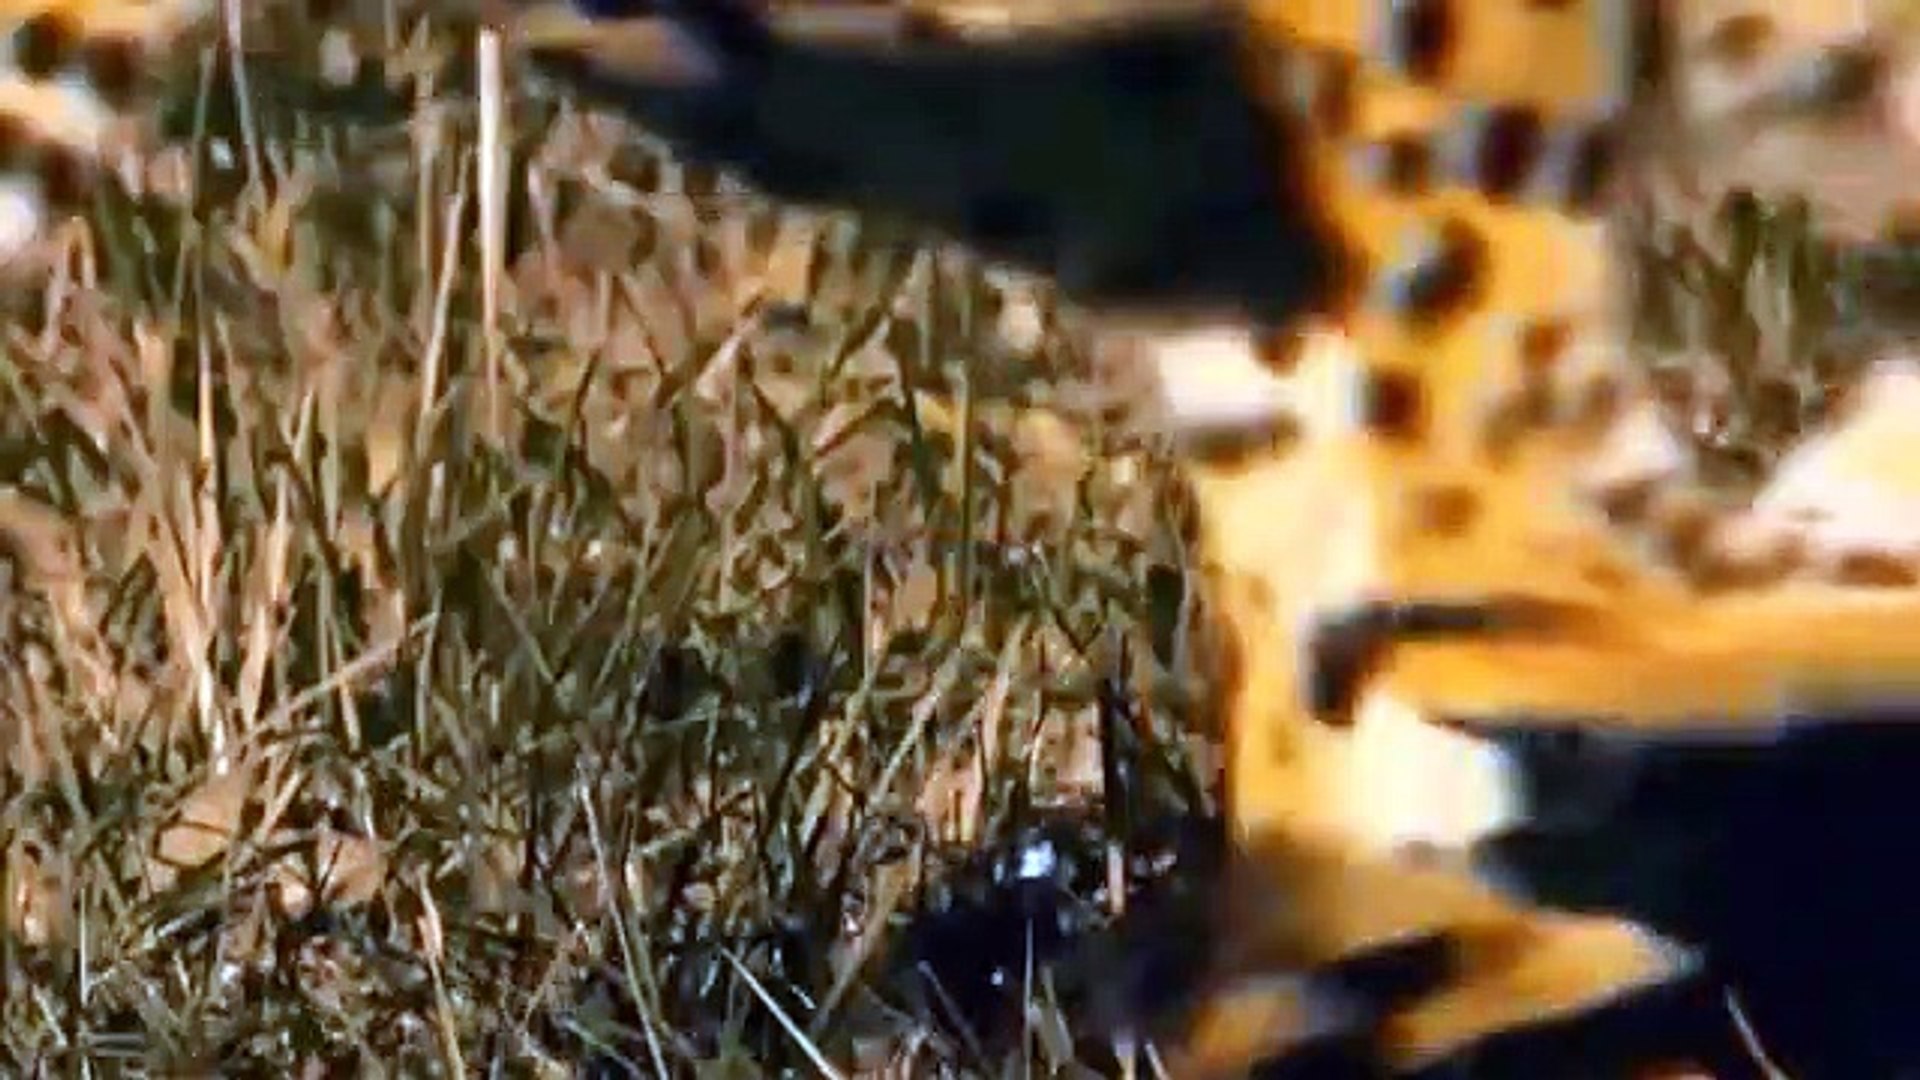 IMPALA LUCKY ESCAPE FROM FIVE CHEETAH CHASING   King Lion destroy Cheetah cubs